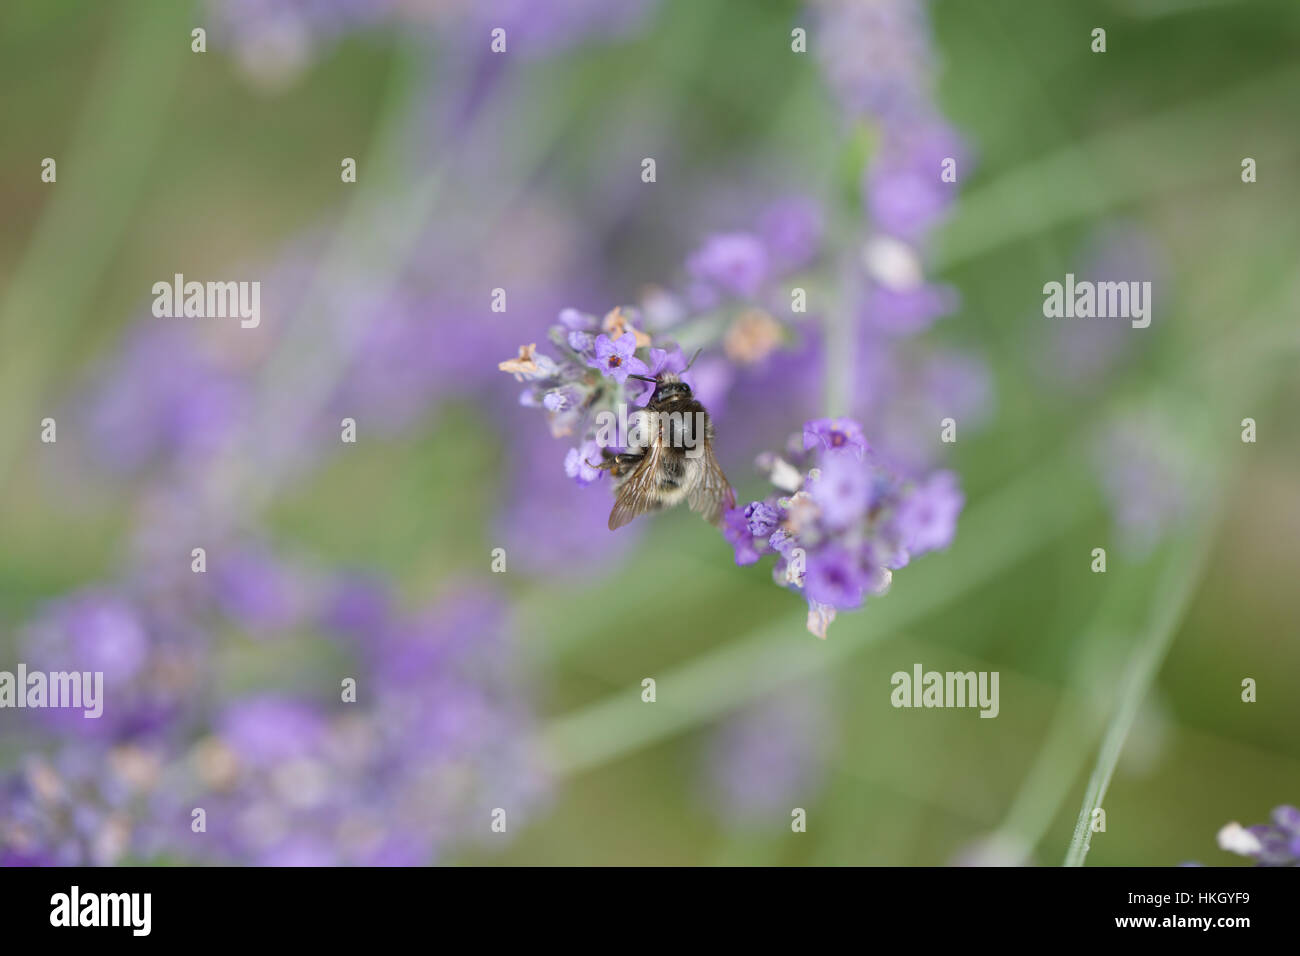 bee on purple flower. lavender, insect, nature, garden. Stock Photo